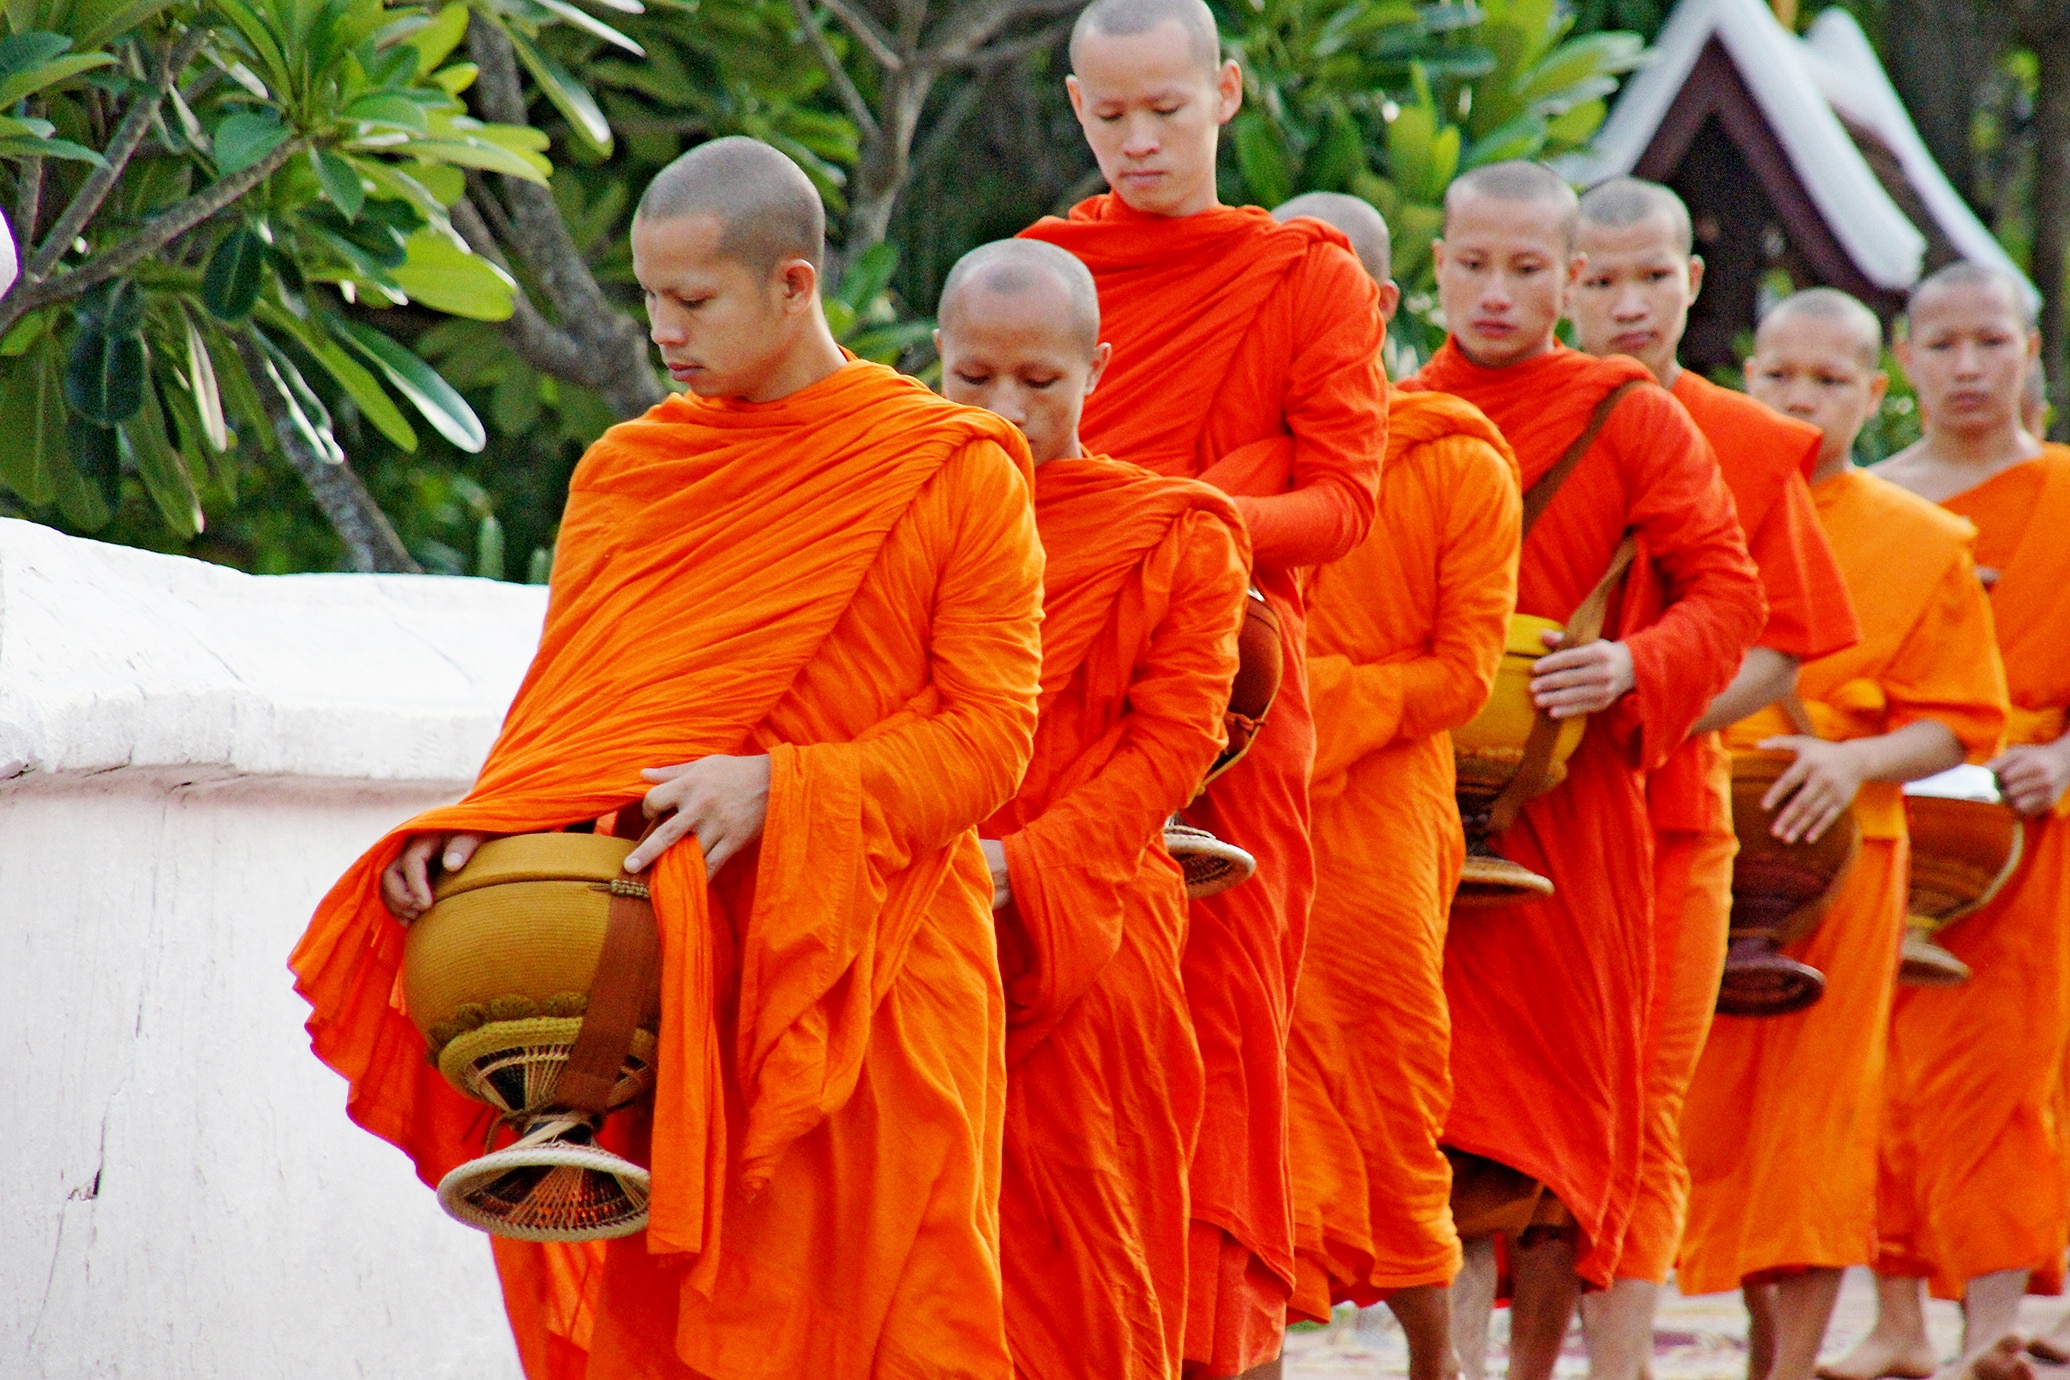 Monks lining up for alms in Luang Prabang